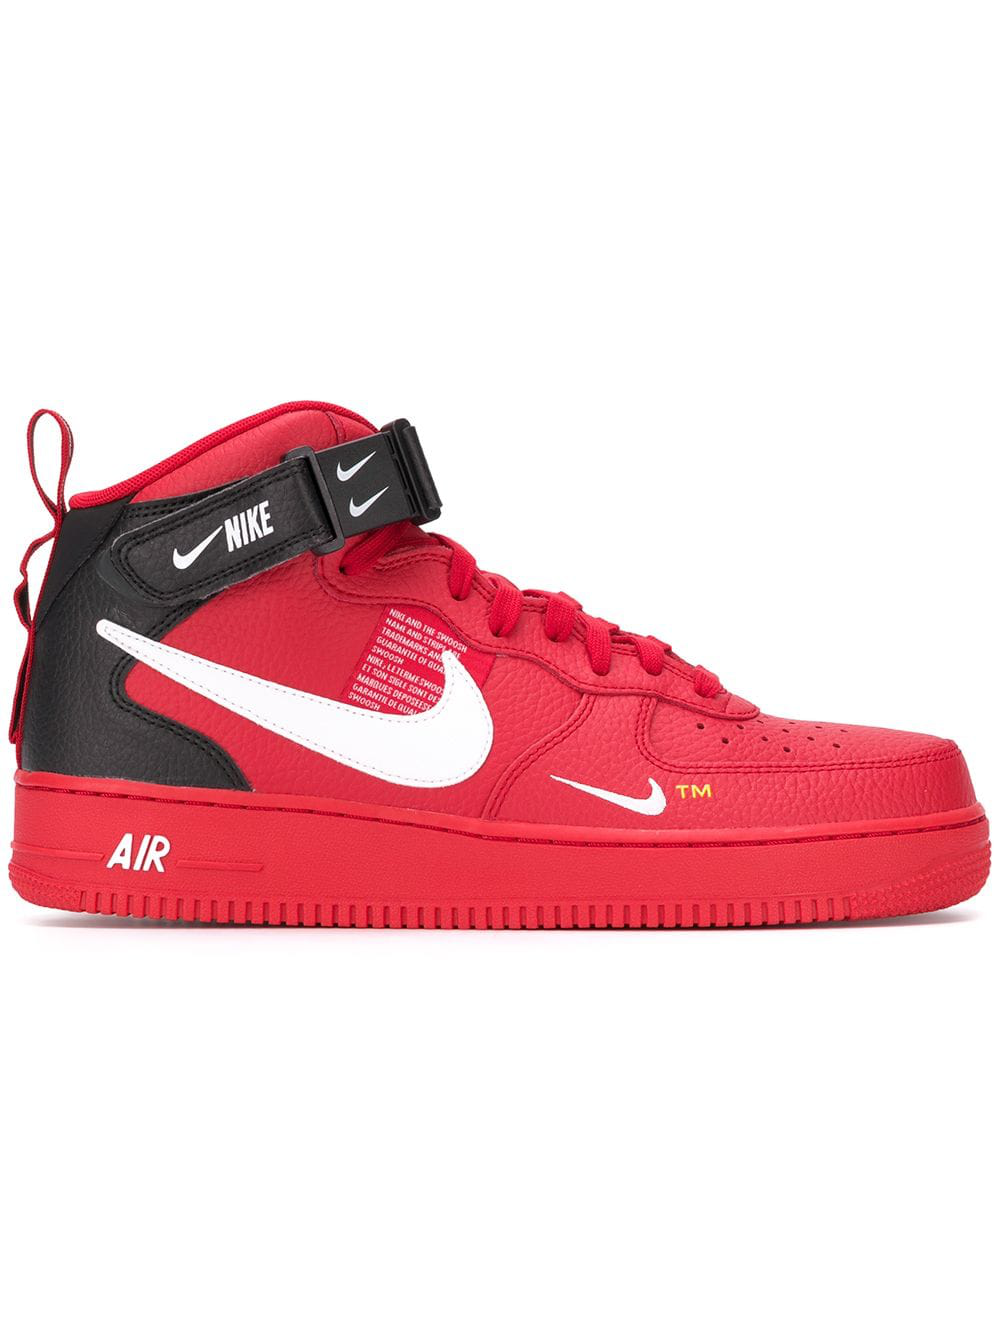 nike air force 1 mid utility red black